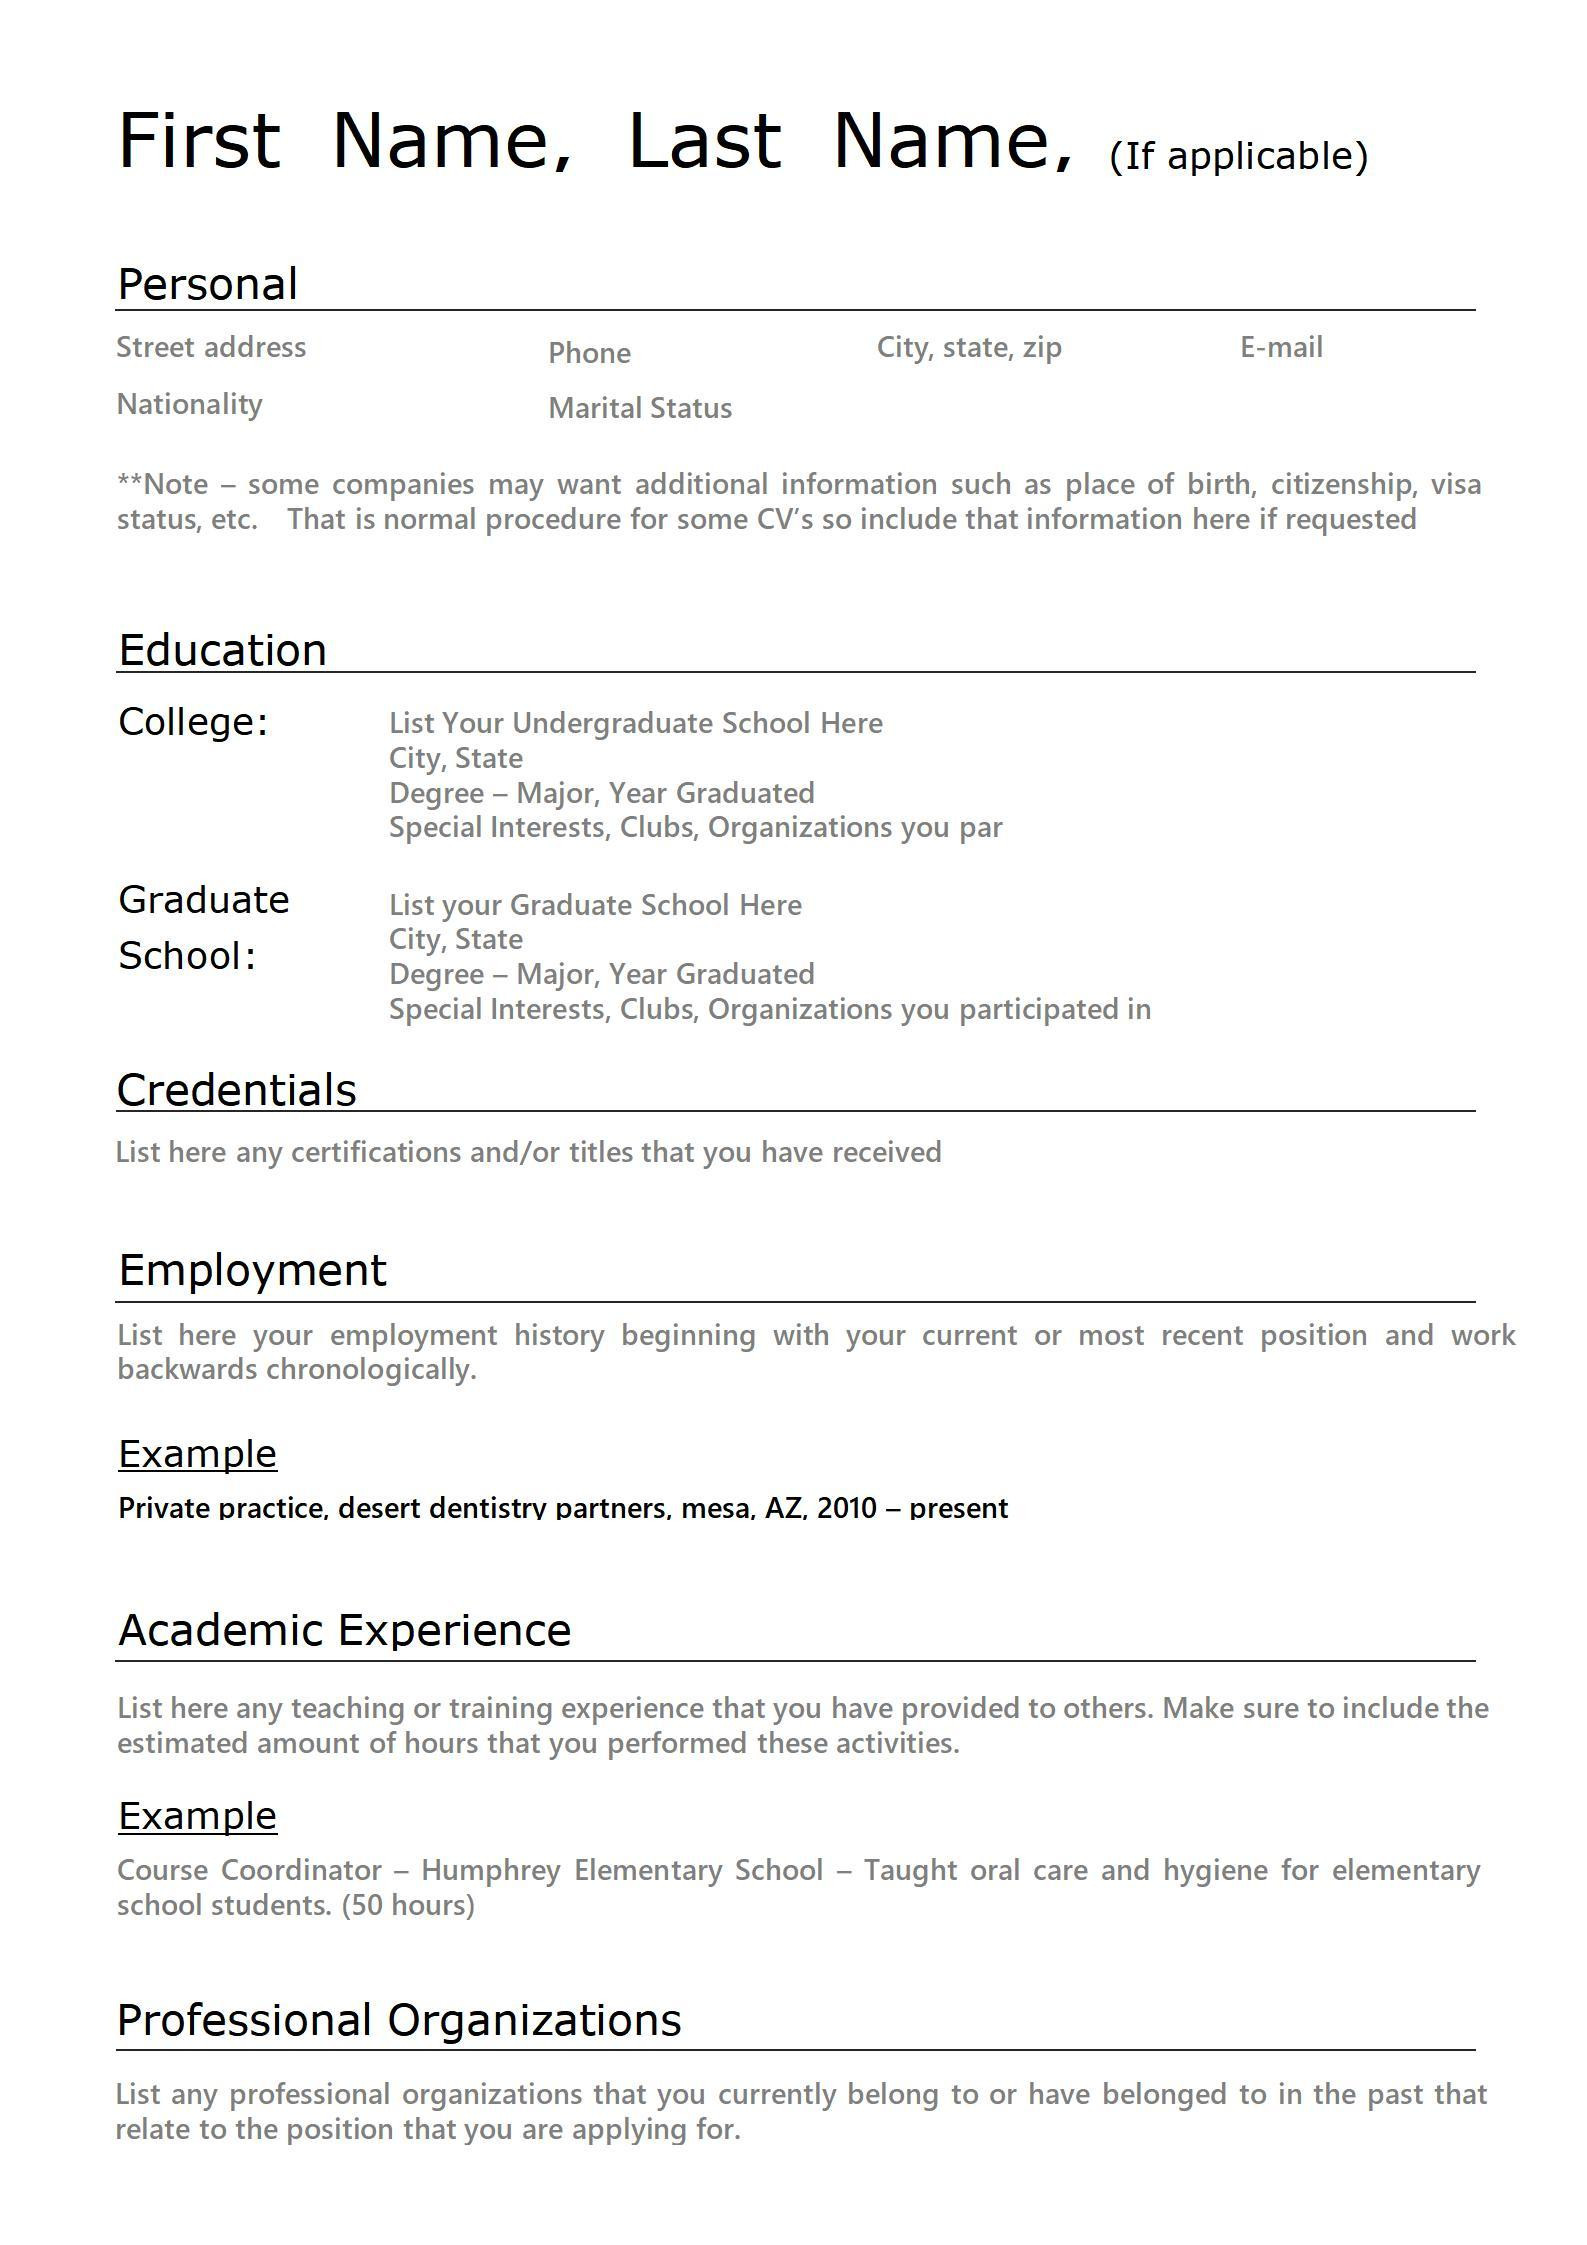 Resume for First Job High School Student Sample First-time Resume with No Experience Samples Wps Office Academy